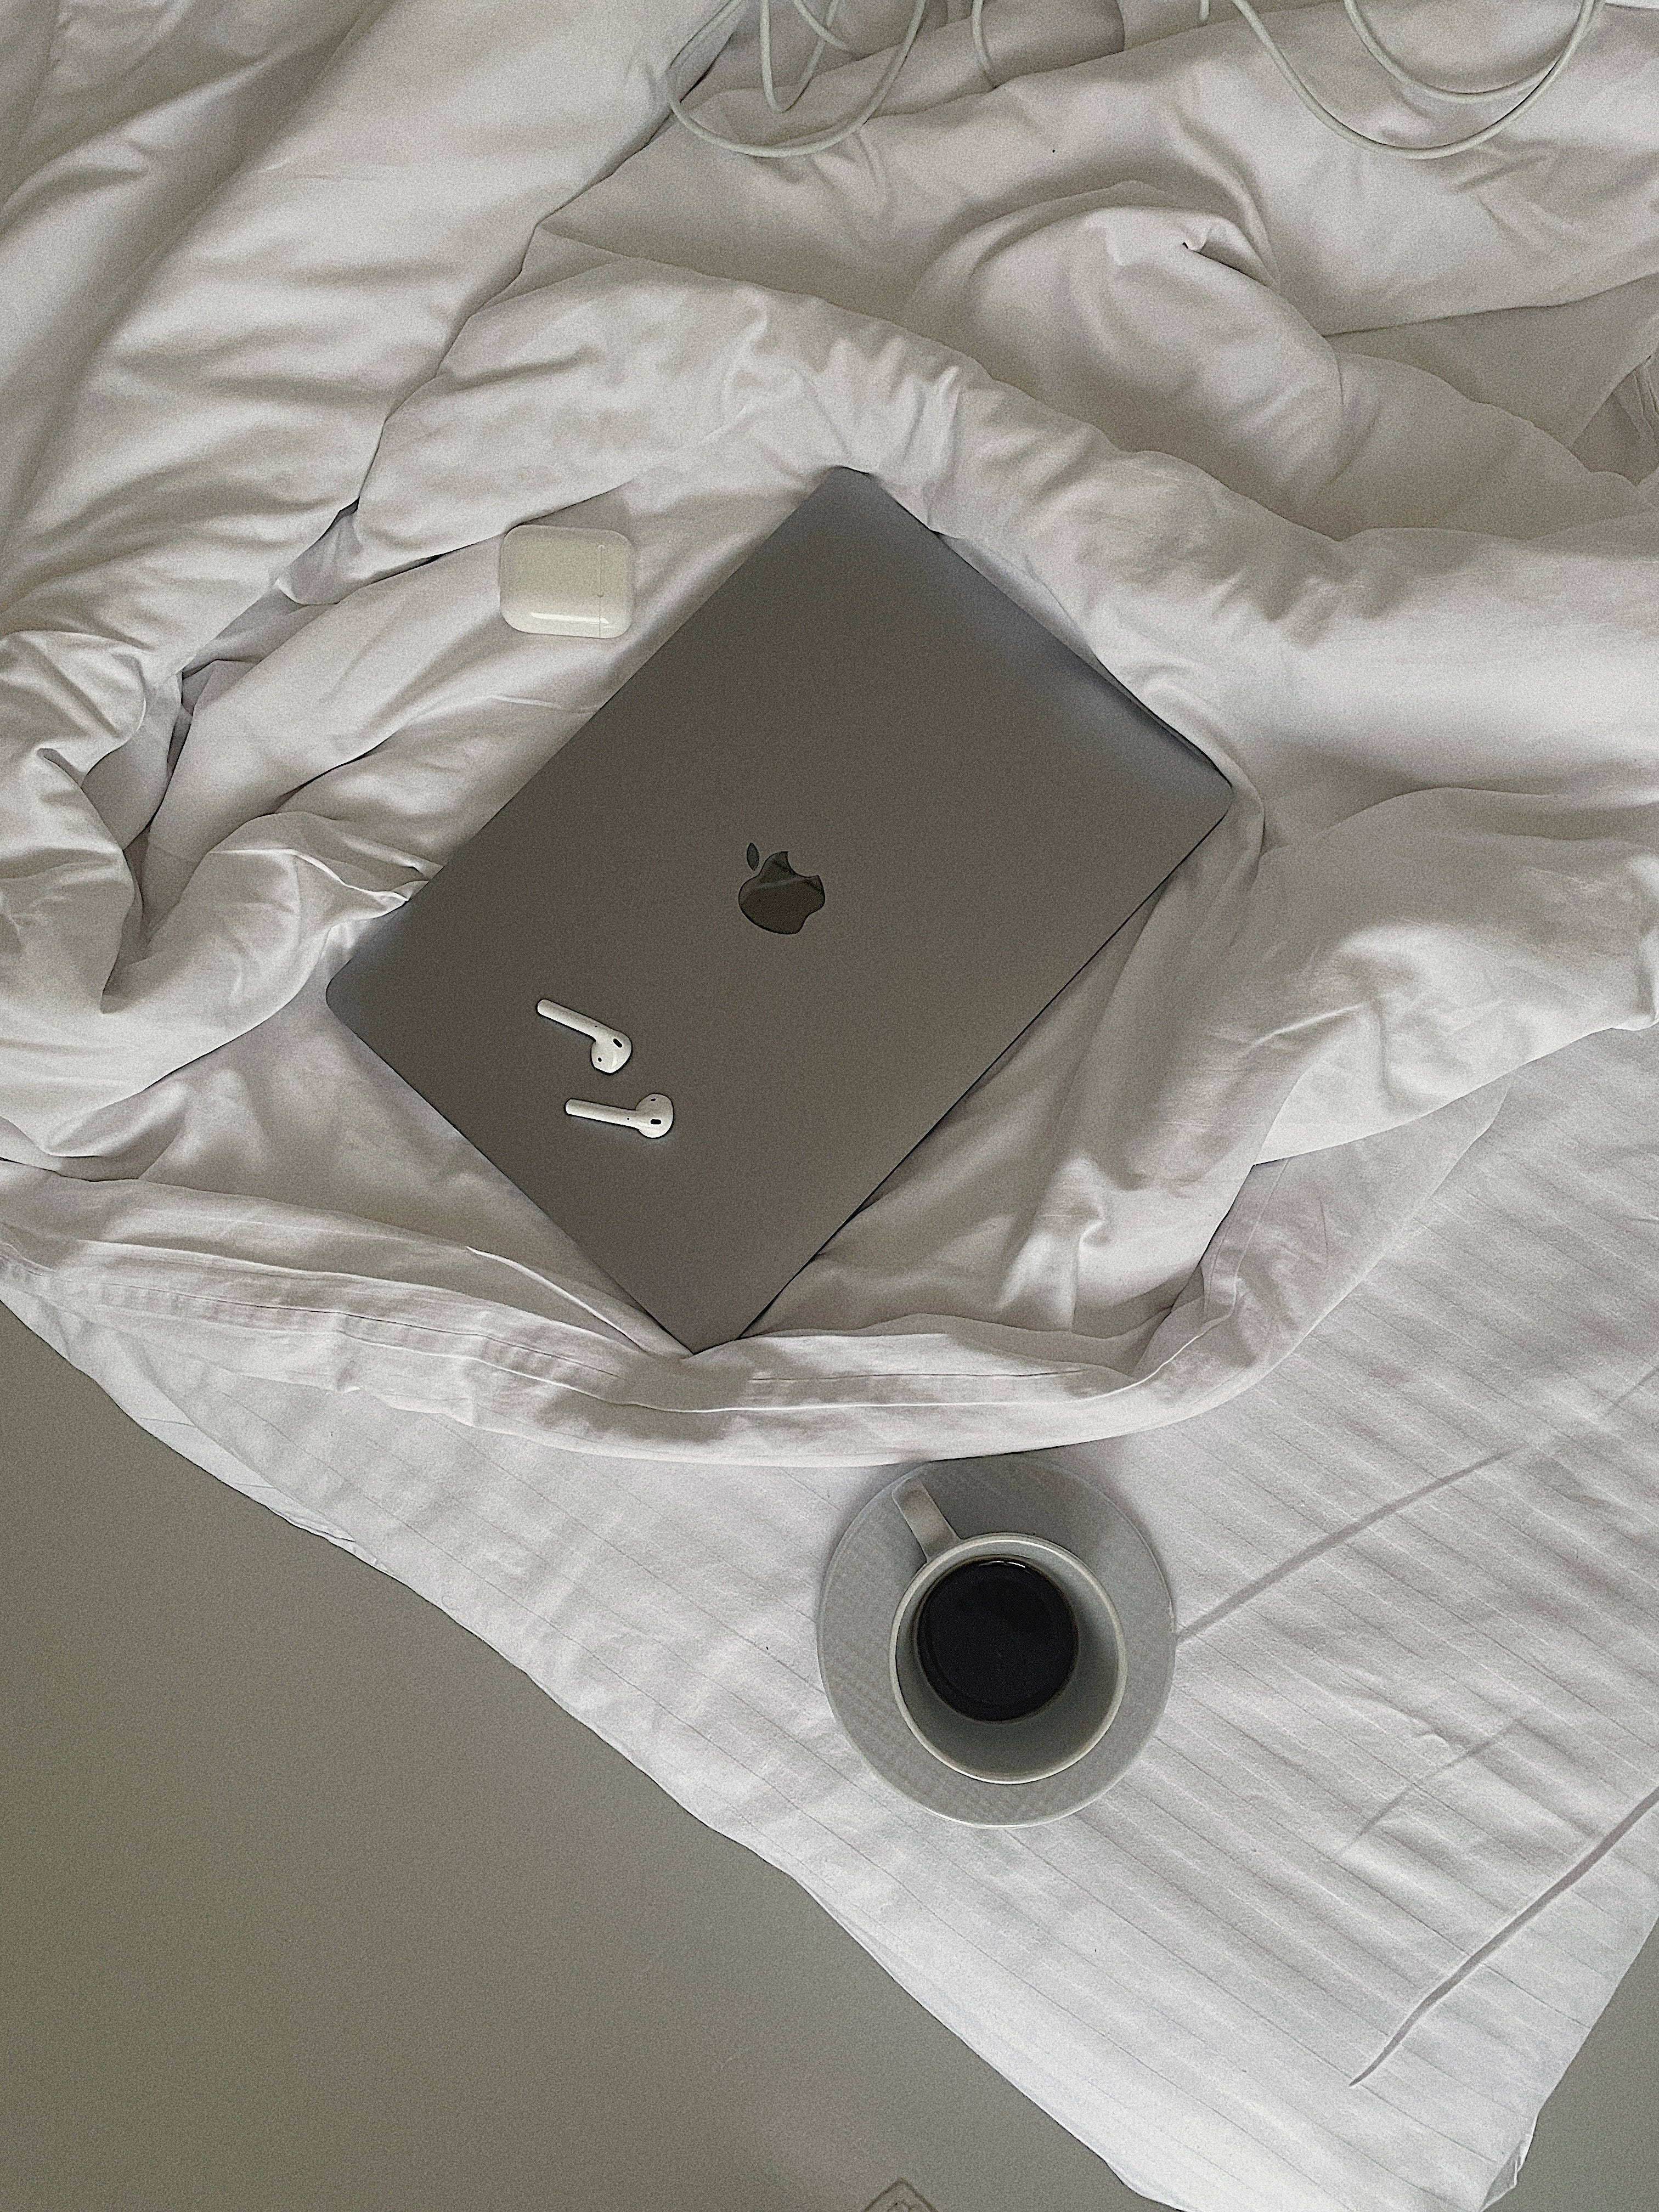 A laptop, earbuds, and a cup of coffee on a bed. - Silver